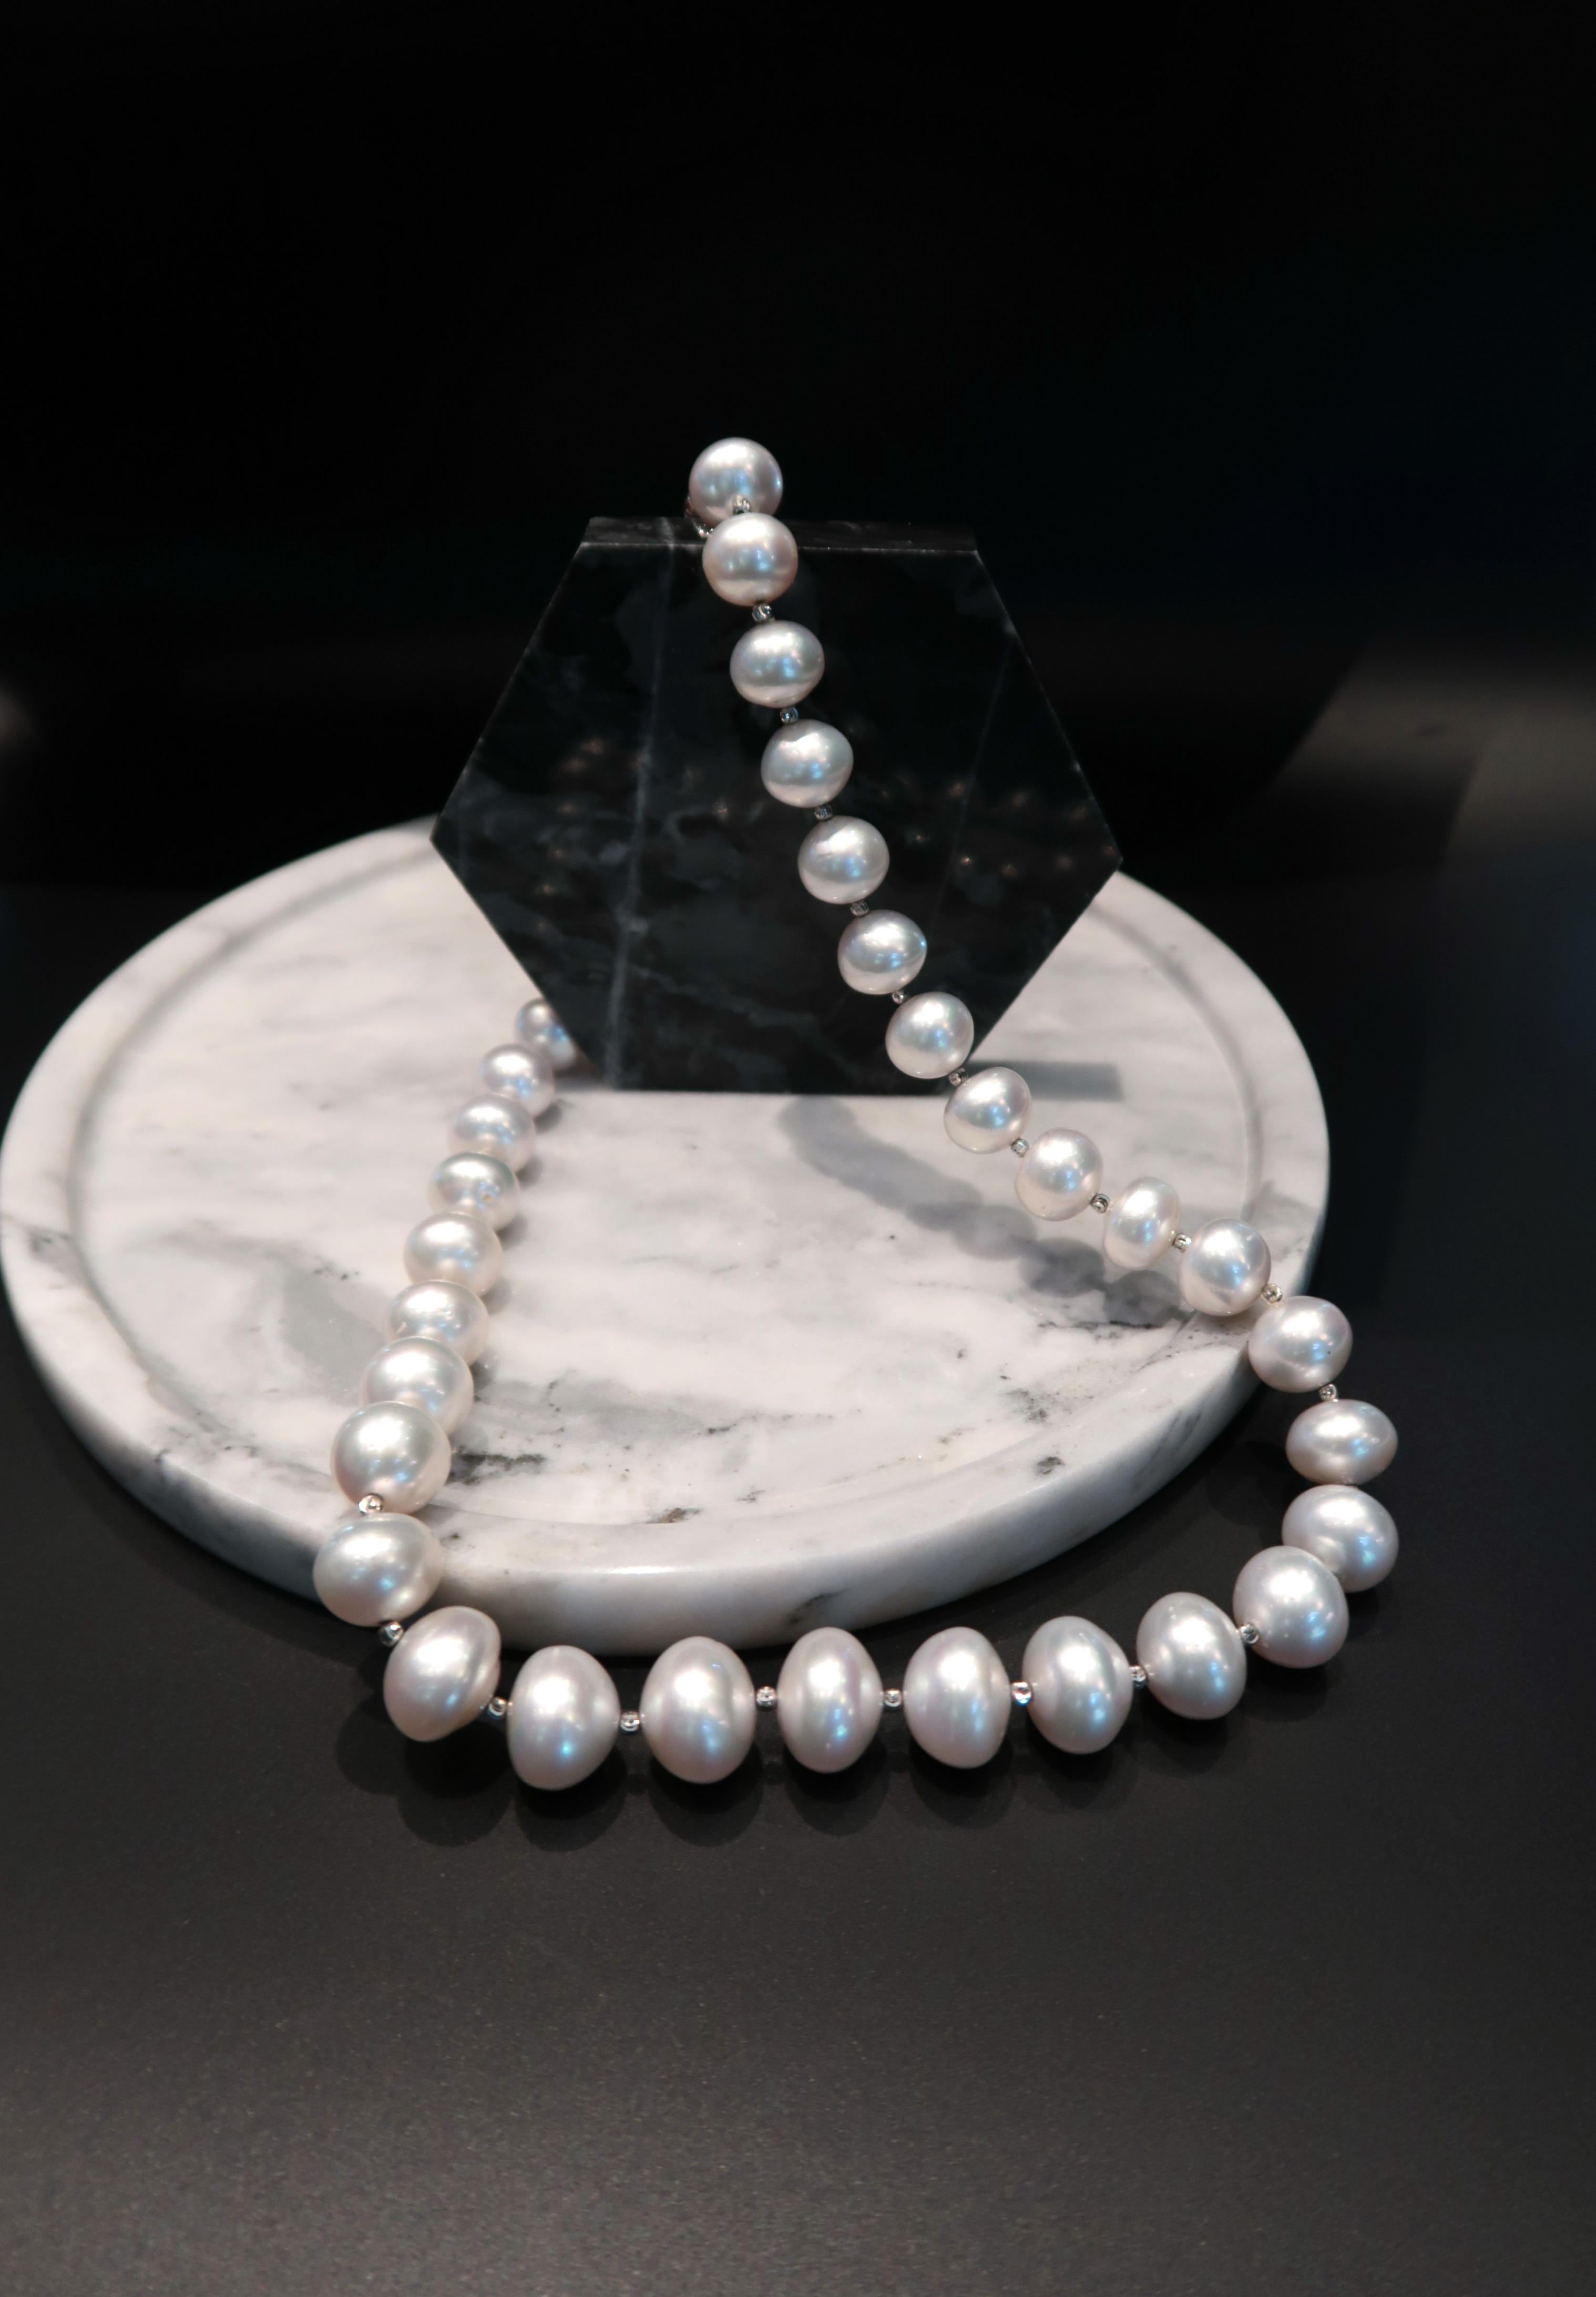 Button White South Sea Pearl Necklace with Faceted 18K White Gold Beads

Pearl: White South Sea, 14.7 - 12.2 mm, 37 pieces
Gold: 18K White Gold, 2.41 g

Length: 20 inches